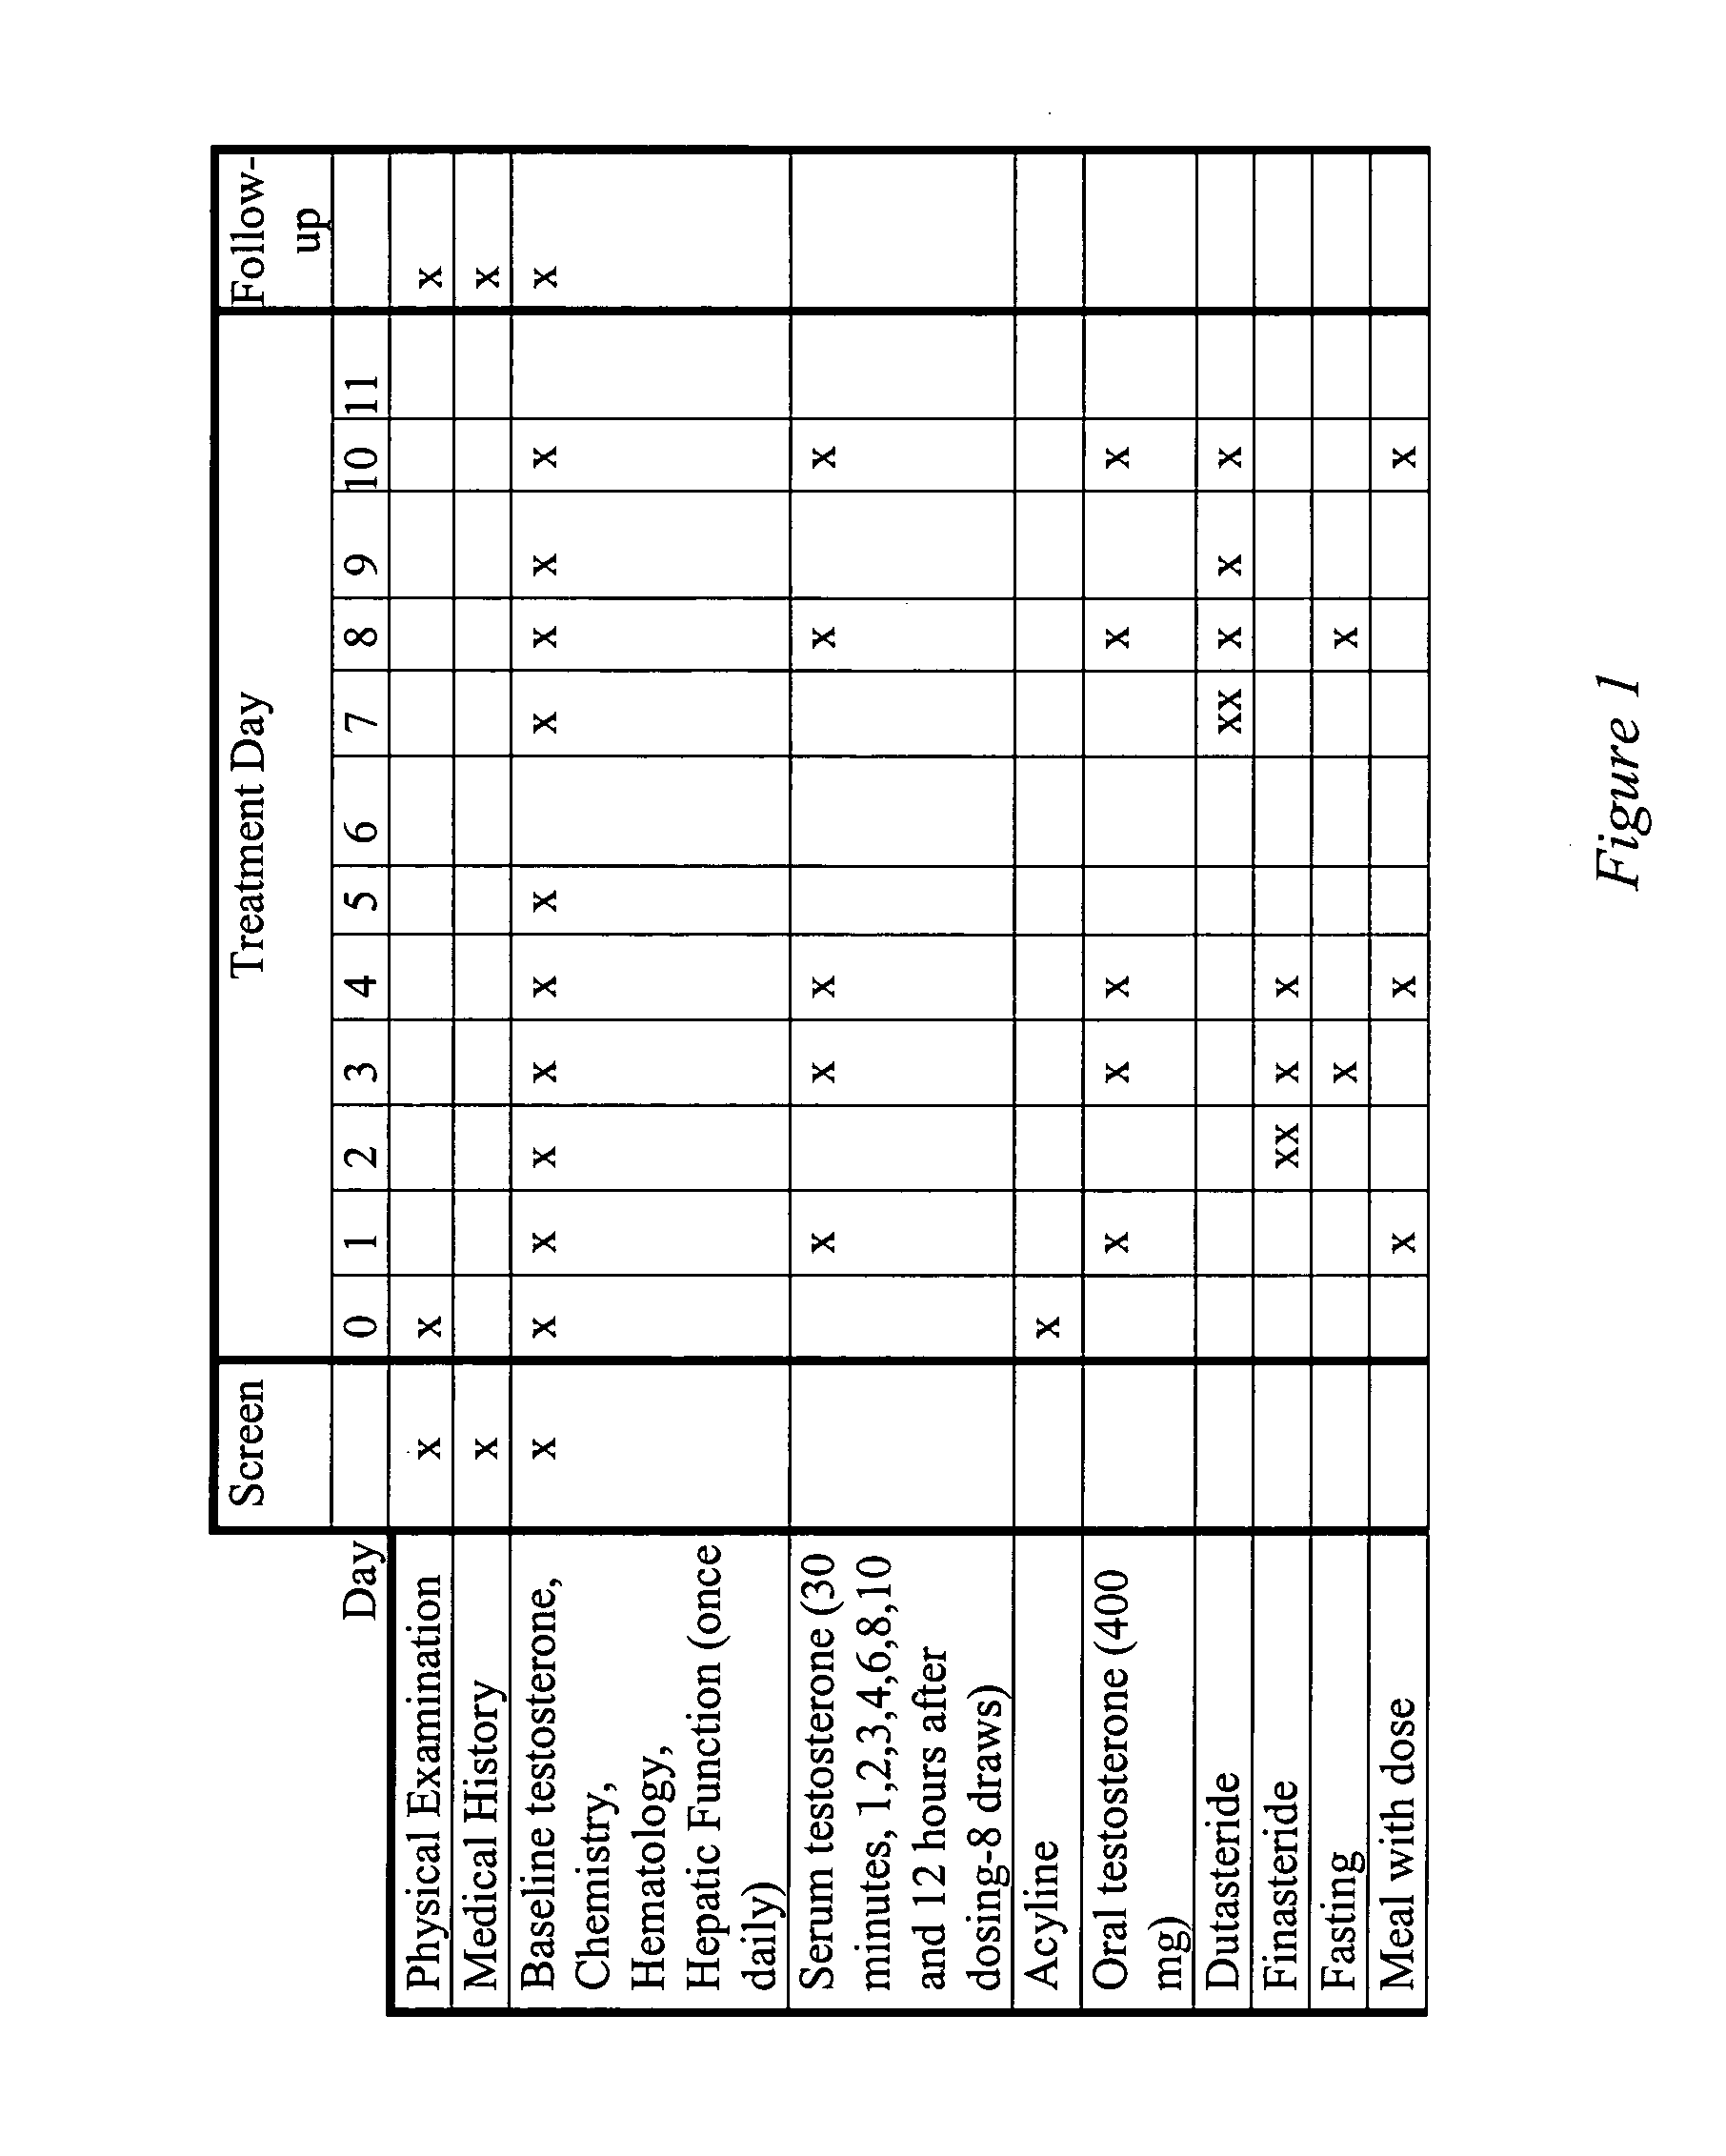 Oral androgen therapy using modulators of testosterone bioavailability